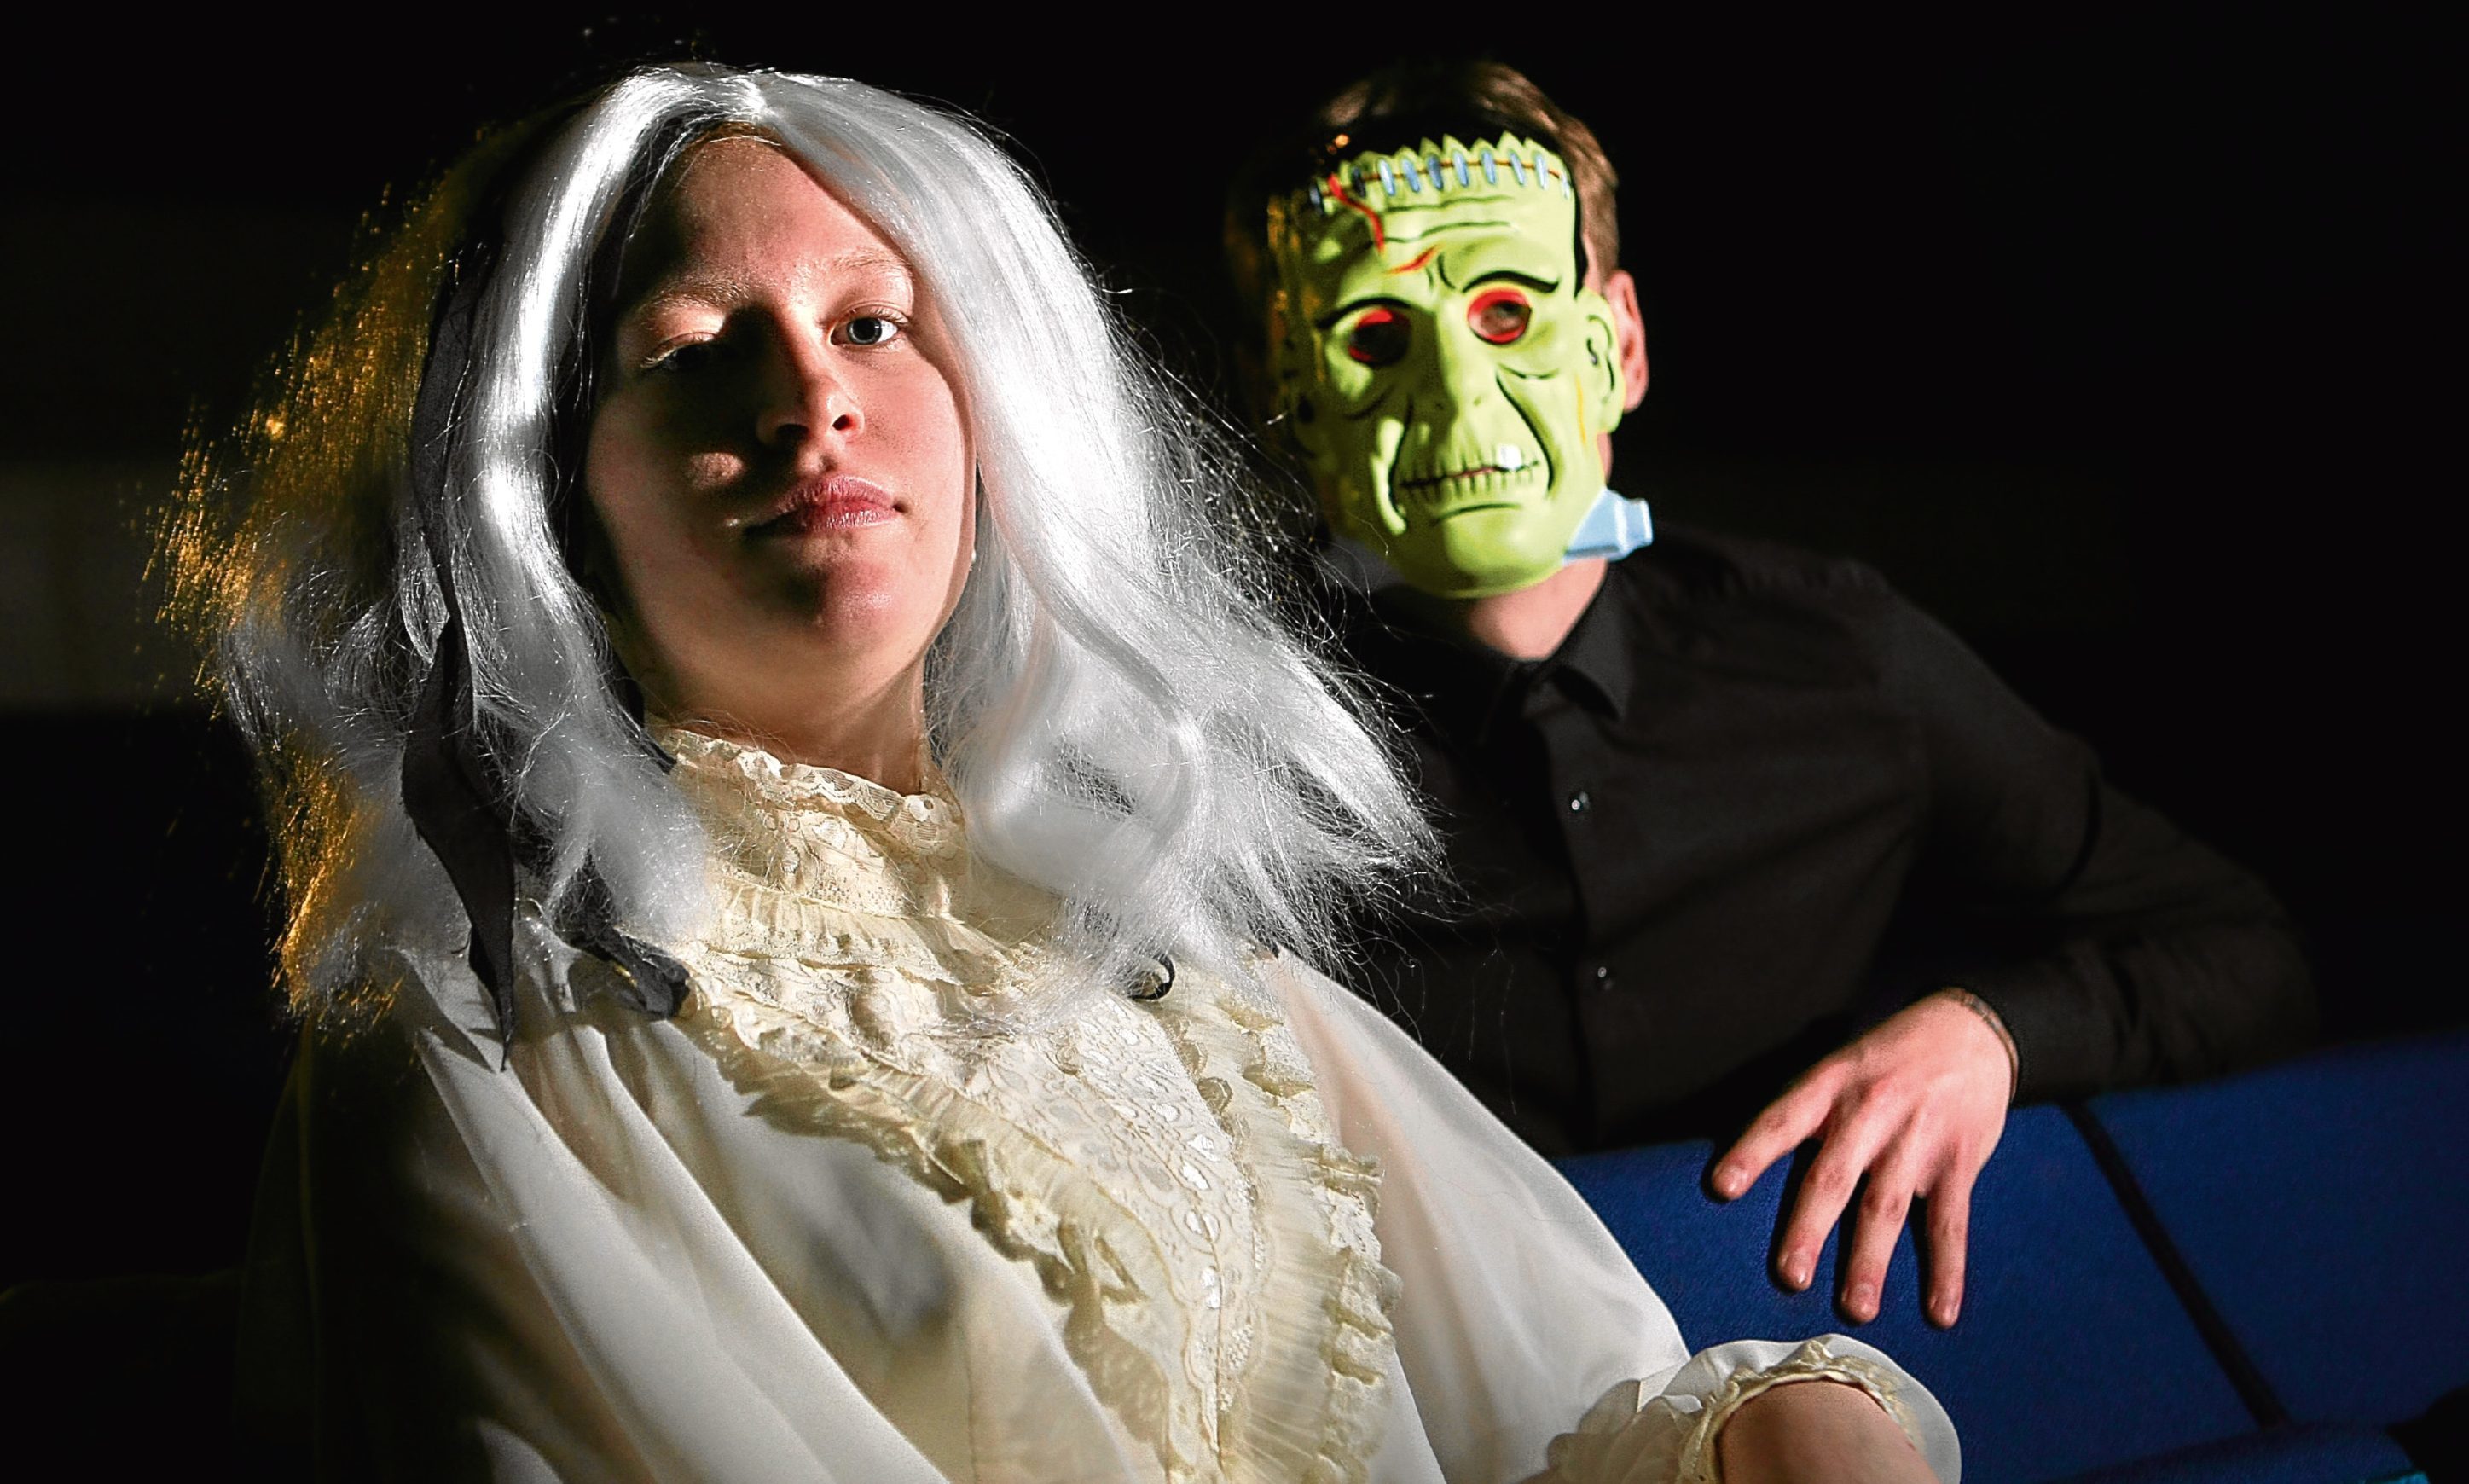 Andrew Manzi and Amelia Newton as Frankenstein and the bride of Frankenstein.